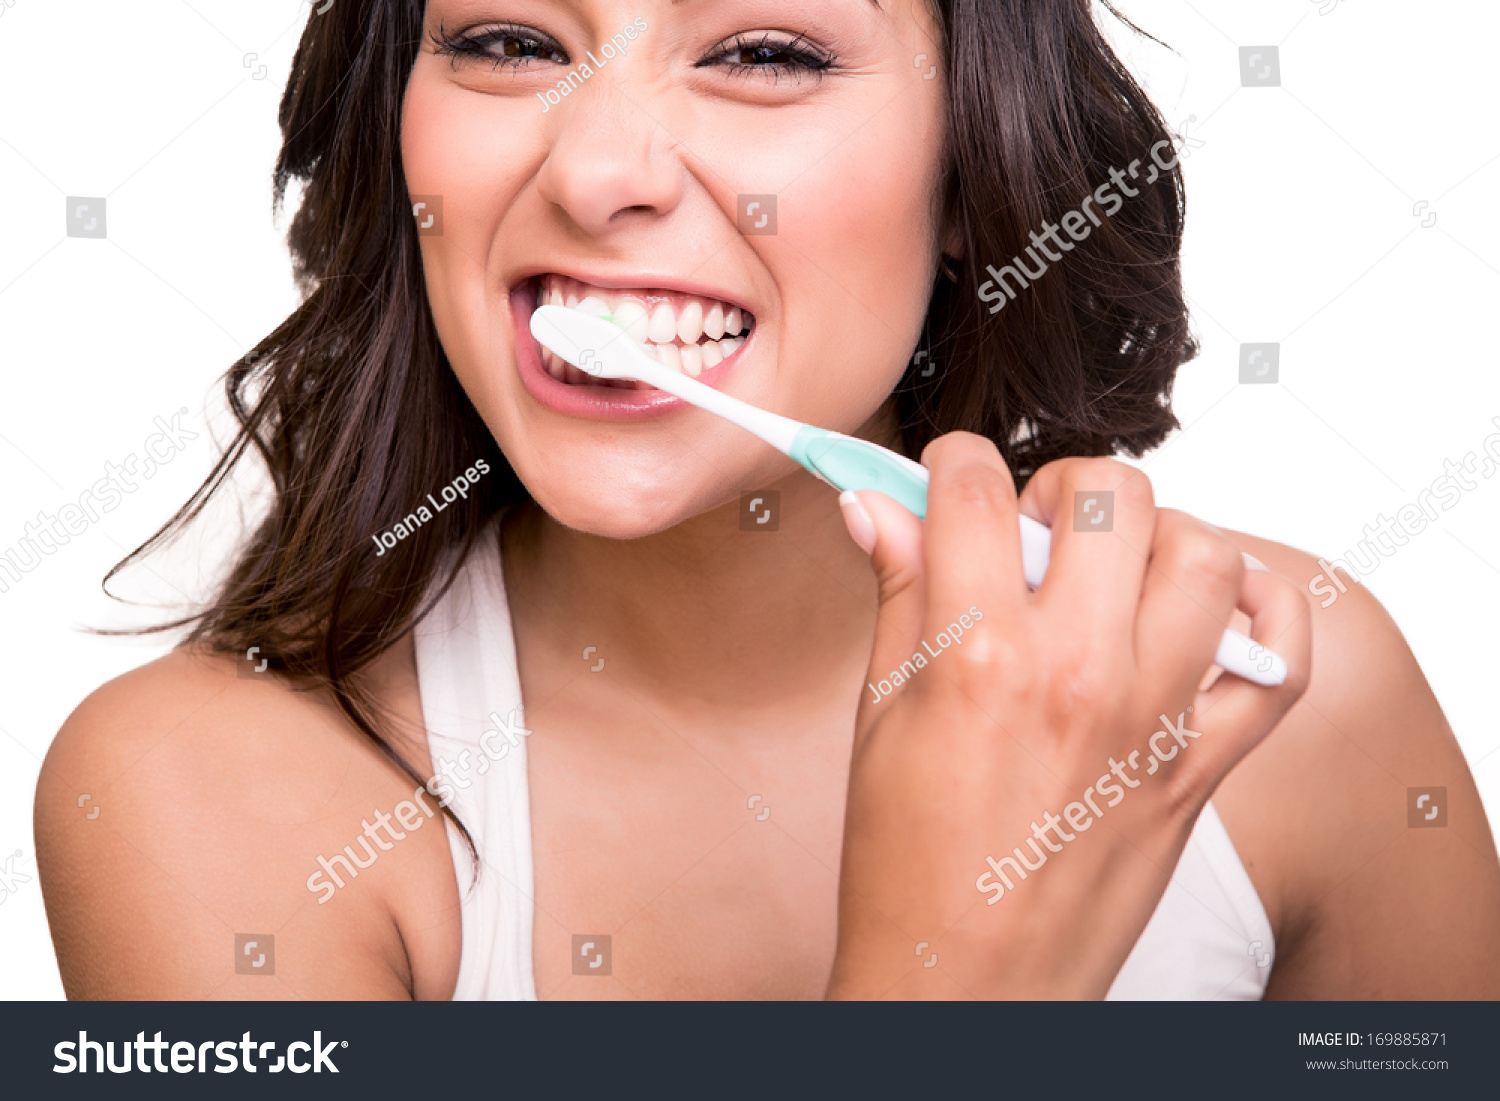 Smiling Young Woman With Healthy Teeth Holding A Tooth